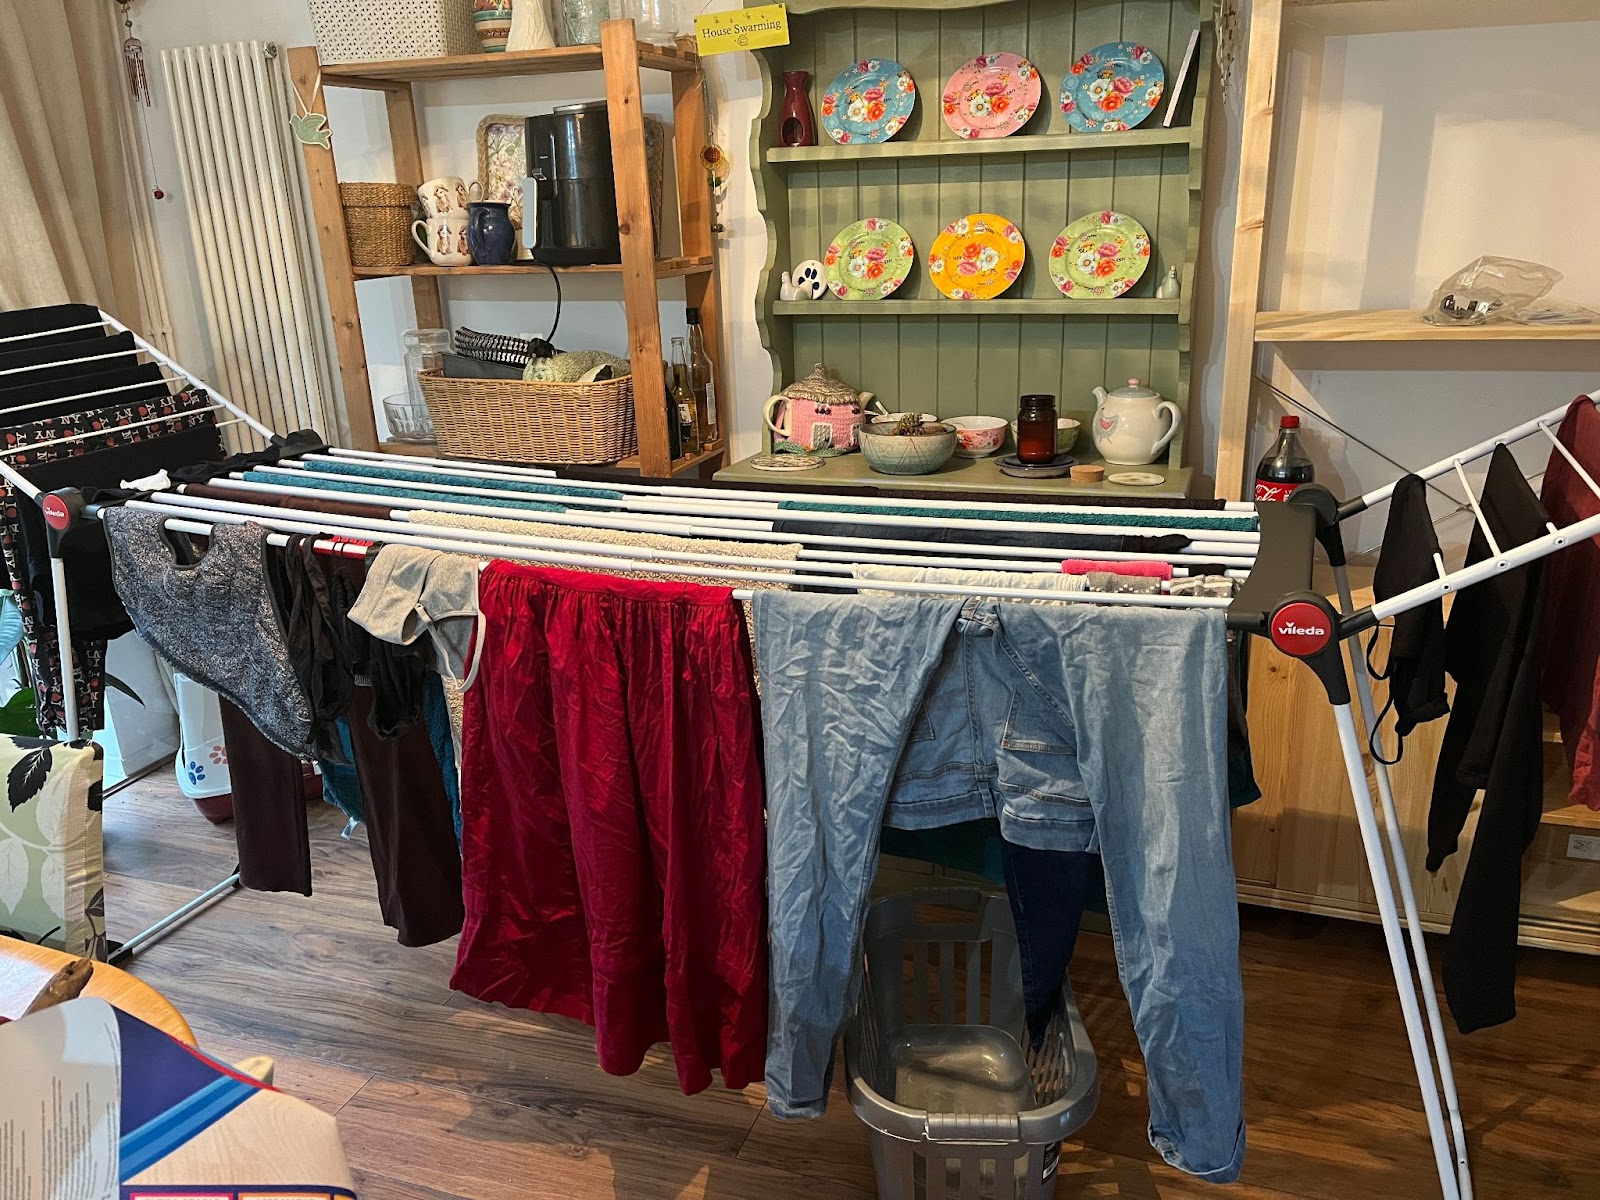 Spend money on a clothes drying rack